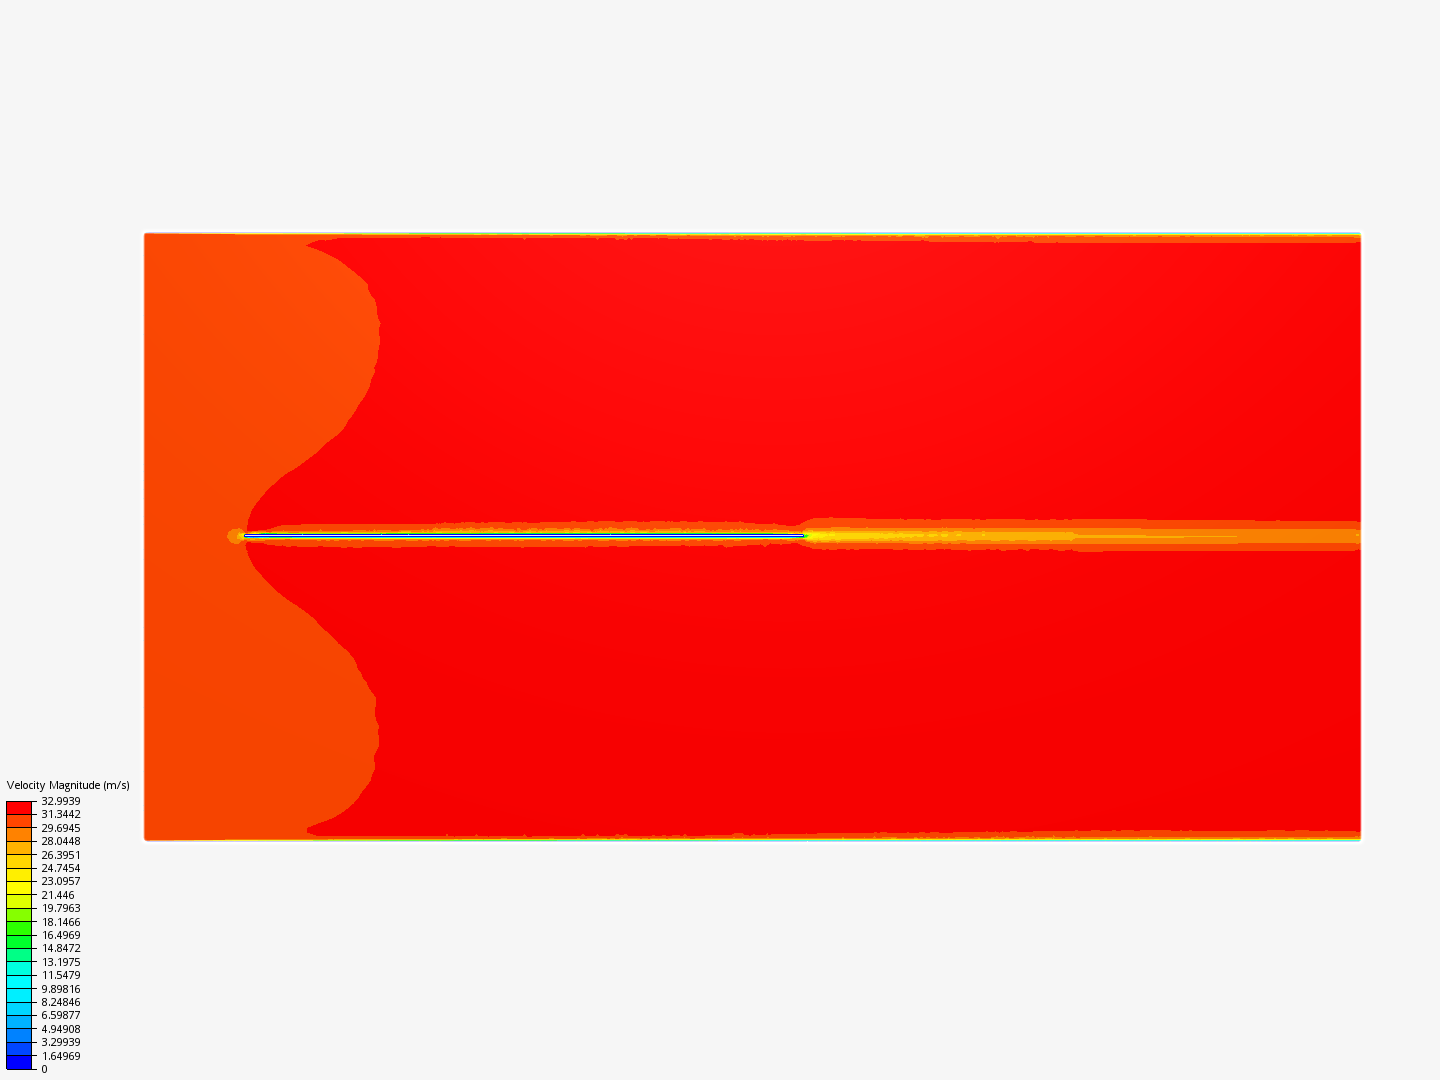 Flow over flat plate image